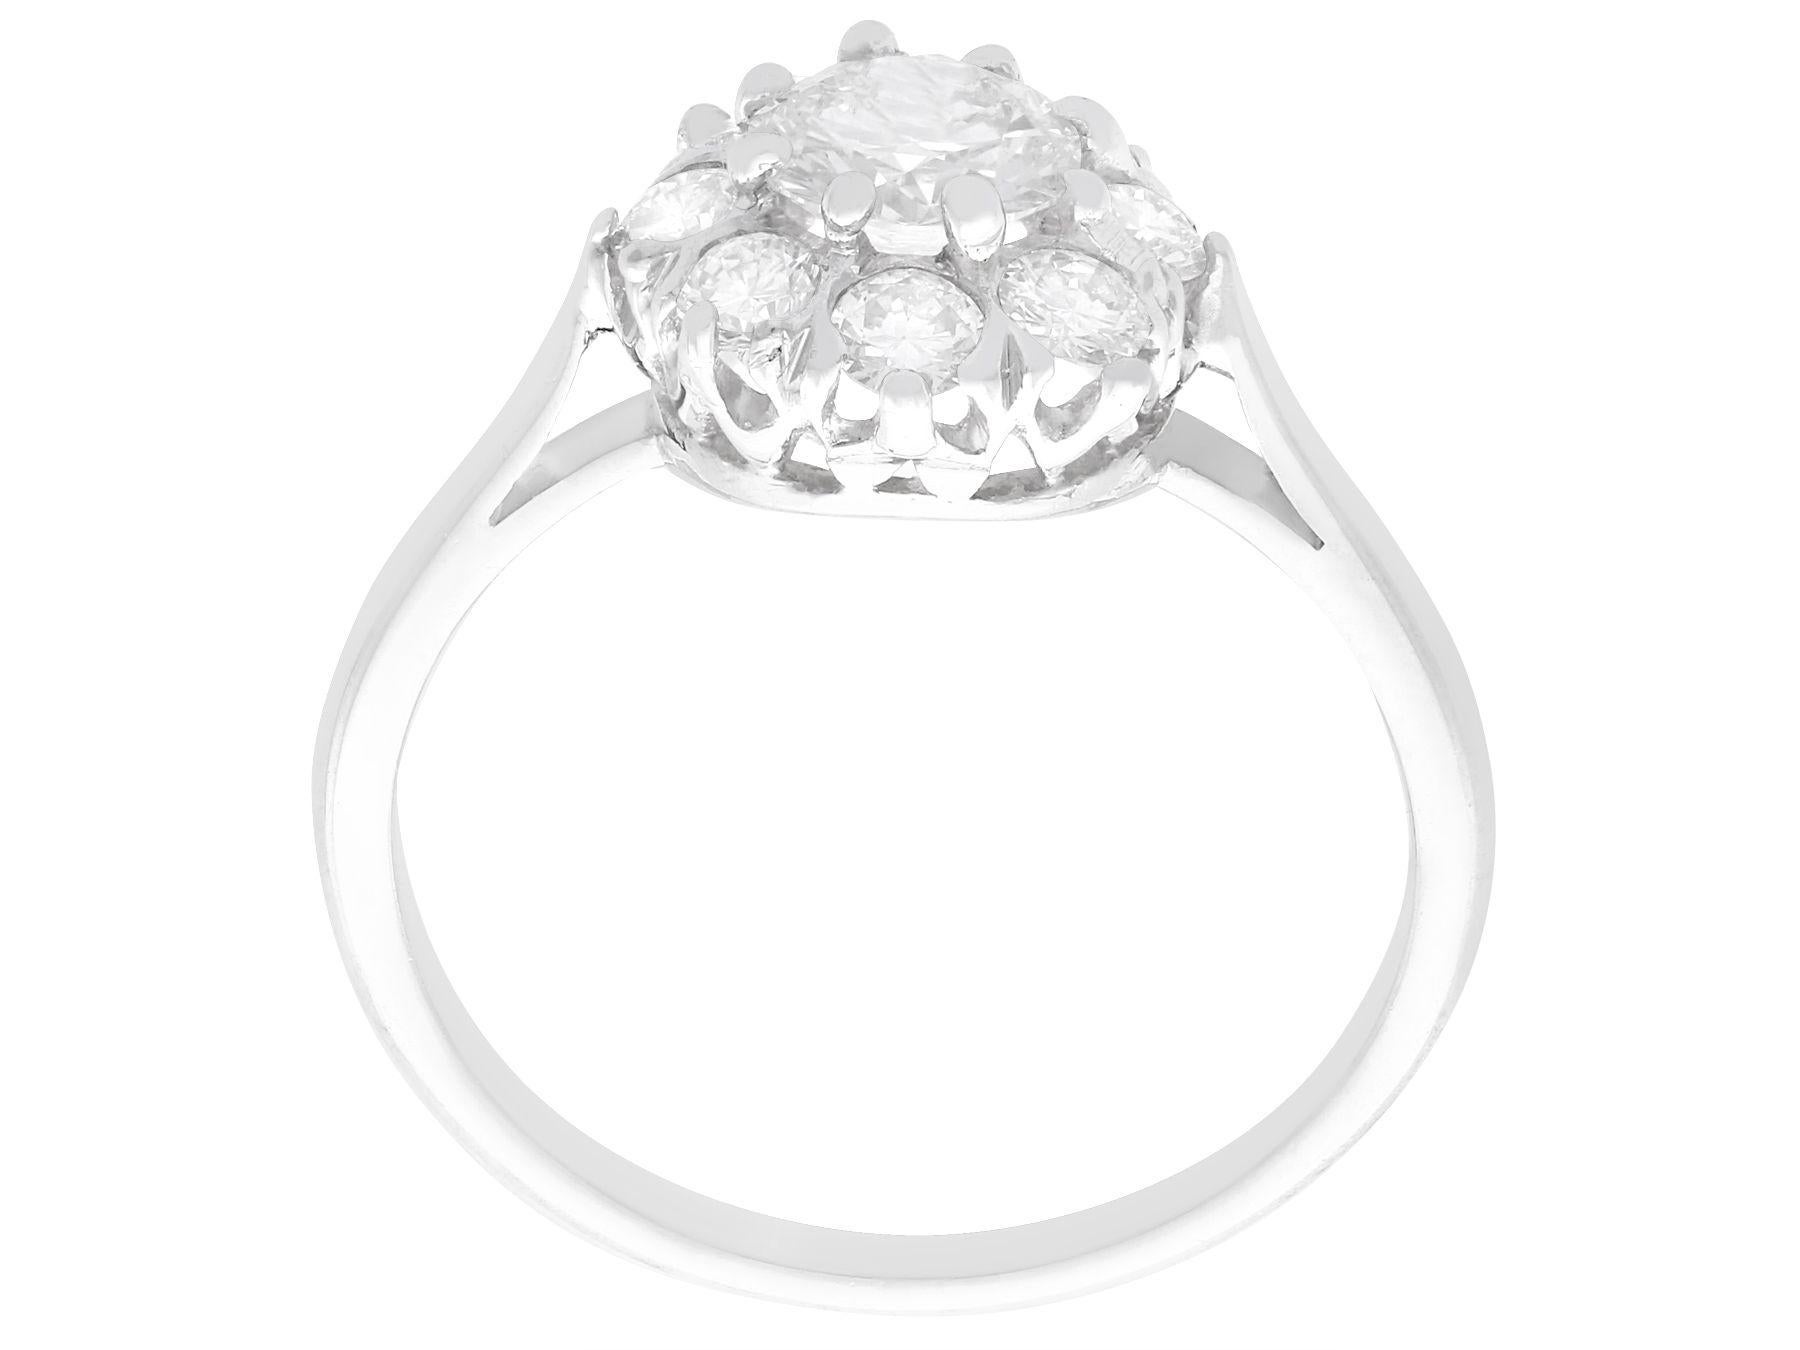 Women's or Men's Vintage 1.14 Carat Diamond and Platinum Cluster Ring, Circa 1940 For Sale